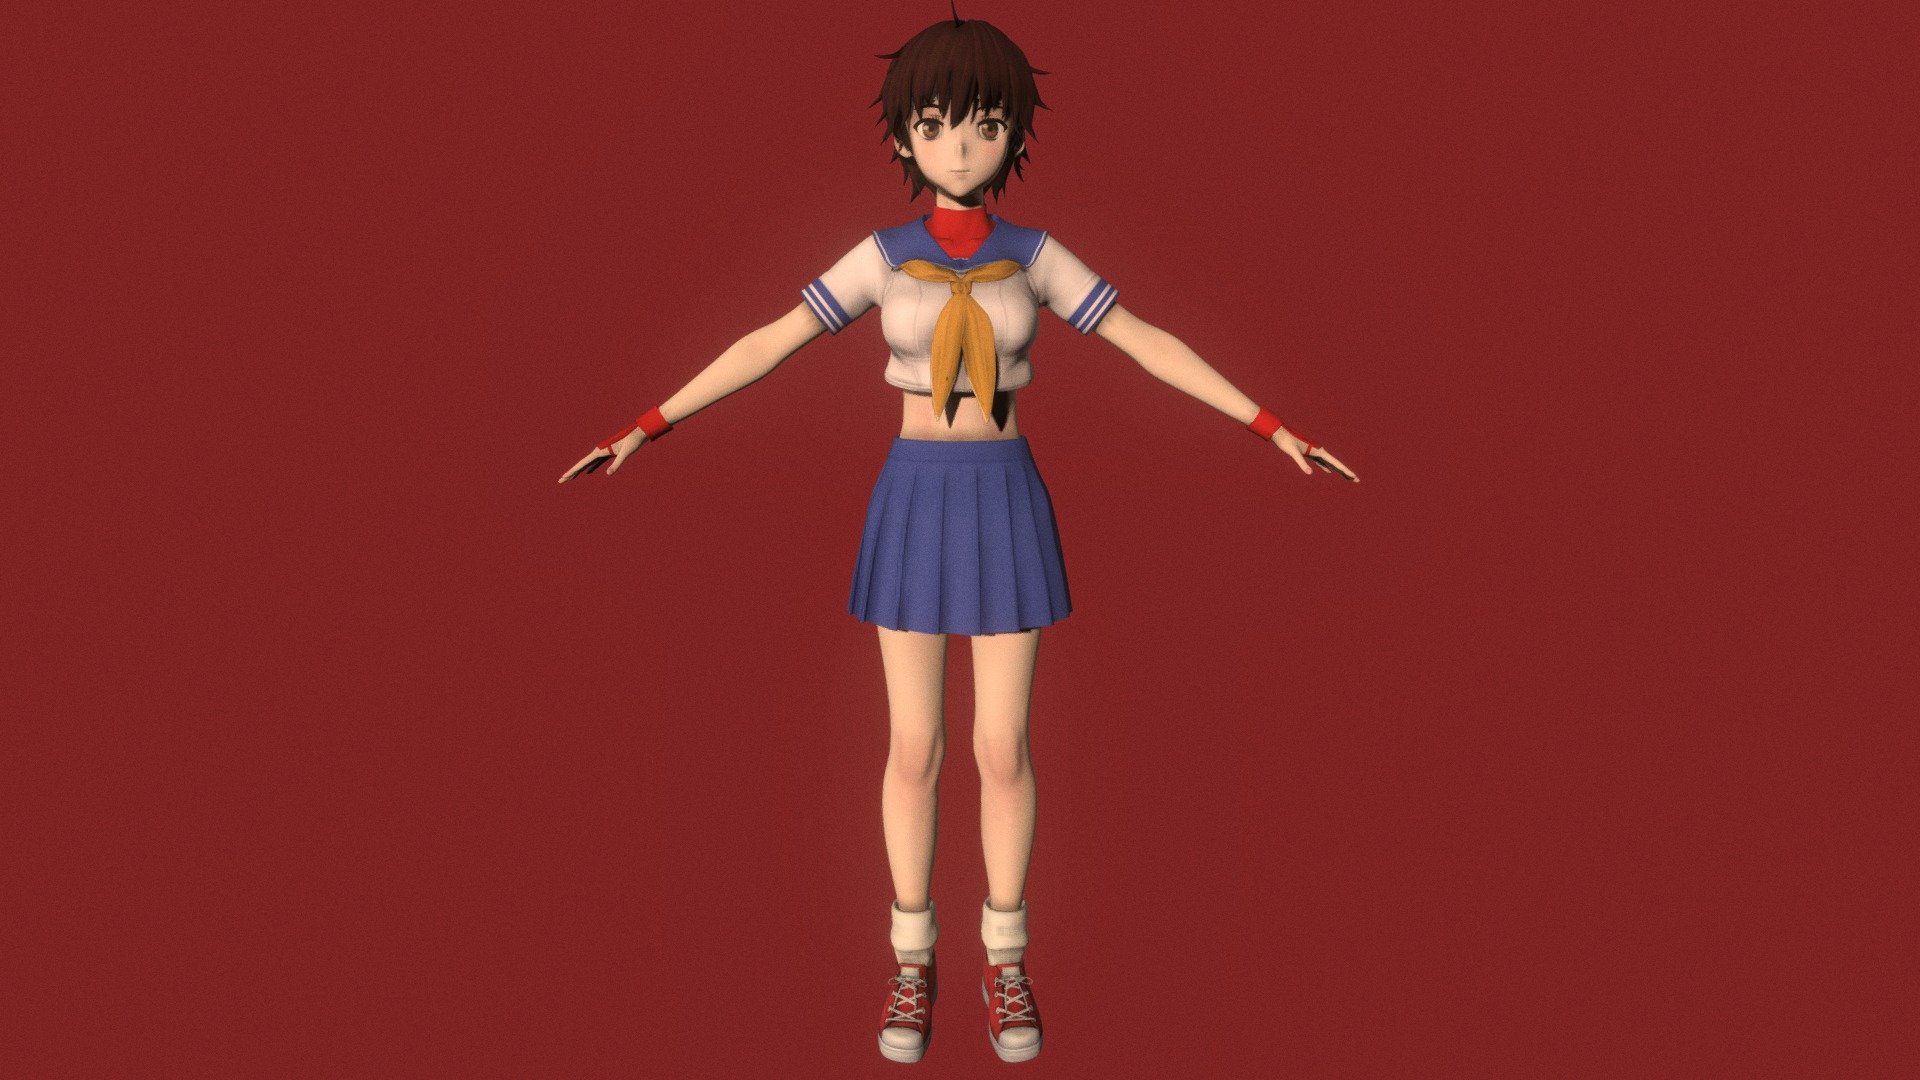 T-pose rigged model of anime girl Sakura Kasugano (Street Fighter).

Body and clothings are rigged and skinned by 3ds Max CAT system.

Eye direction and facial animation controlled by Morpher modifier / Shape Keys / Blendshape.

This product include .FBX (ver. 7200) and .MAX (ver. 2010) files.

3ds Max version is turbosmoothed to give a high quality render (as you can see here).

Original main body mesh have ~7.000 polys.

This 3D model may need some tweaking to adapt the rig system to games engine and other platforms.

I support convert model to various file formats (the rig data will be lost in this process): 3DS; AI; ASE; DAE; DWF; DWG; DXF; FLT; HTR; IGS; M3G; MQO; OBJ; SAT; STL; W3D; WRL; X.

You can buy all of my models in one pack to save cost: https://sketchfab.com/3d-models/all-of-my-anime-girls-c5a56156994e4193b9e8fa21a3b8360b

And I can make commission models.

If you have any questions, please leave a comment or contact me via my email 3d.eden.project@gmail.com 3d model